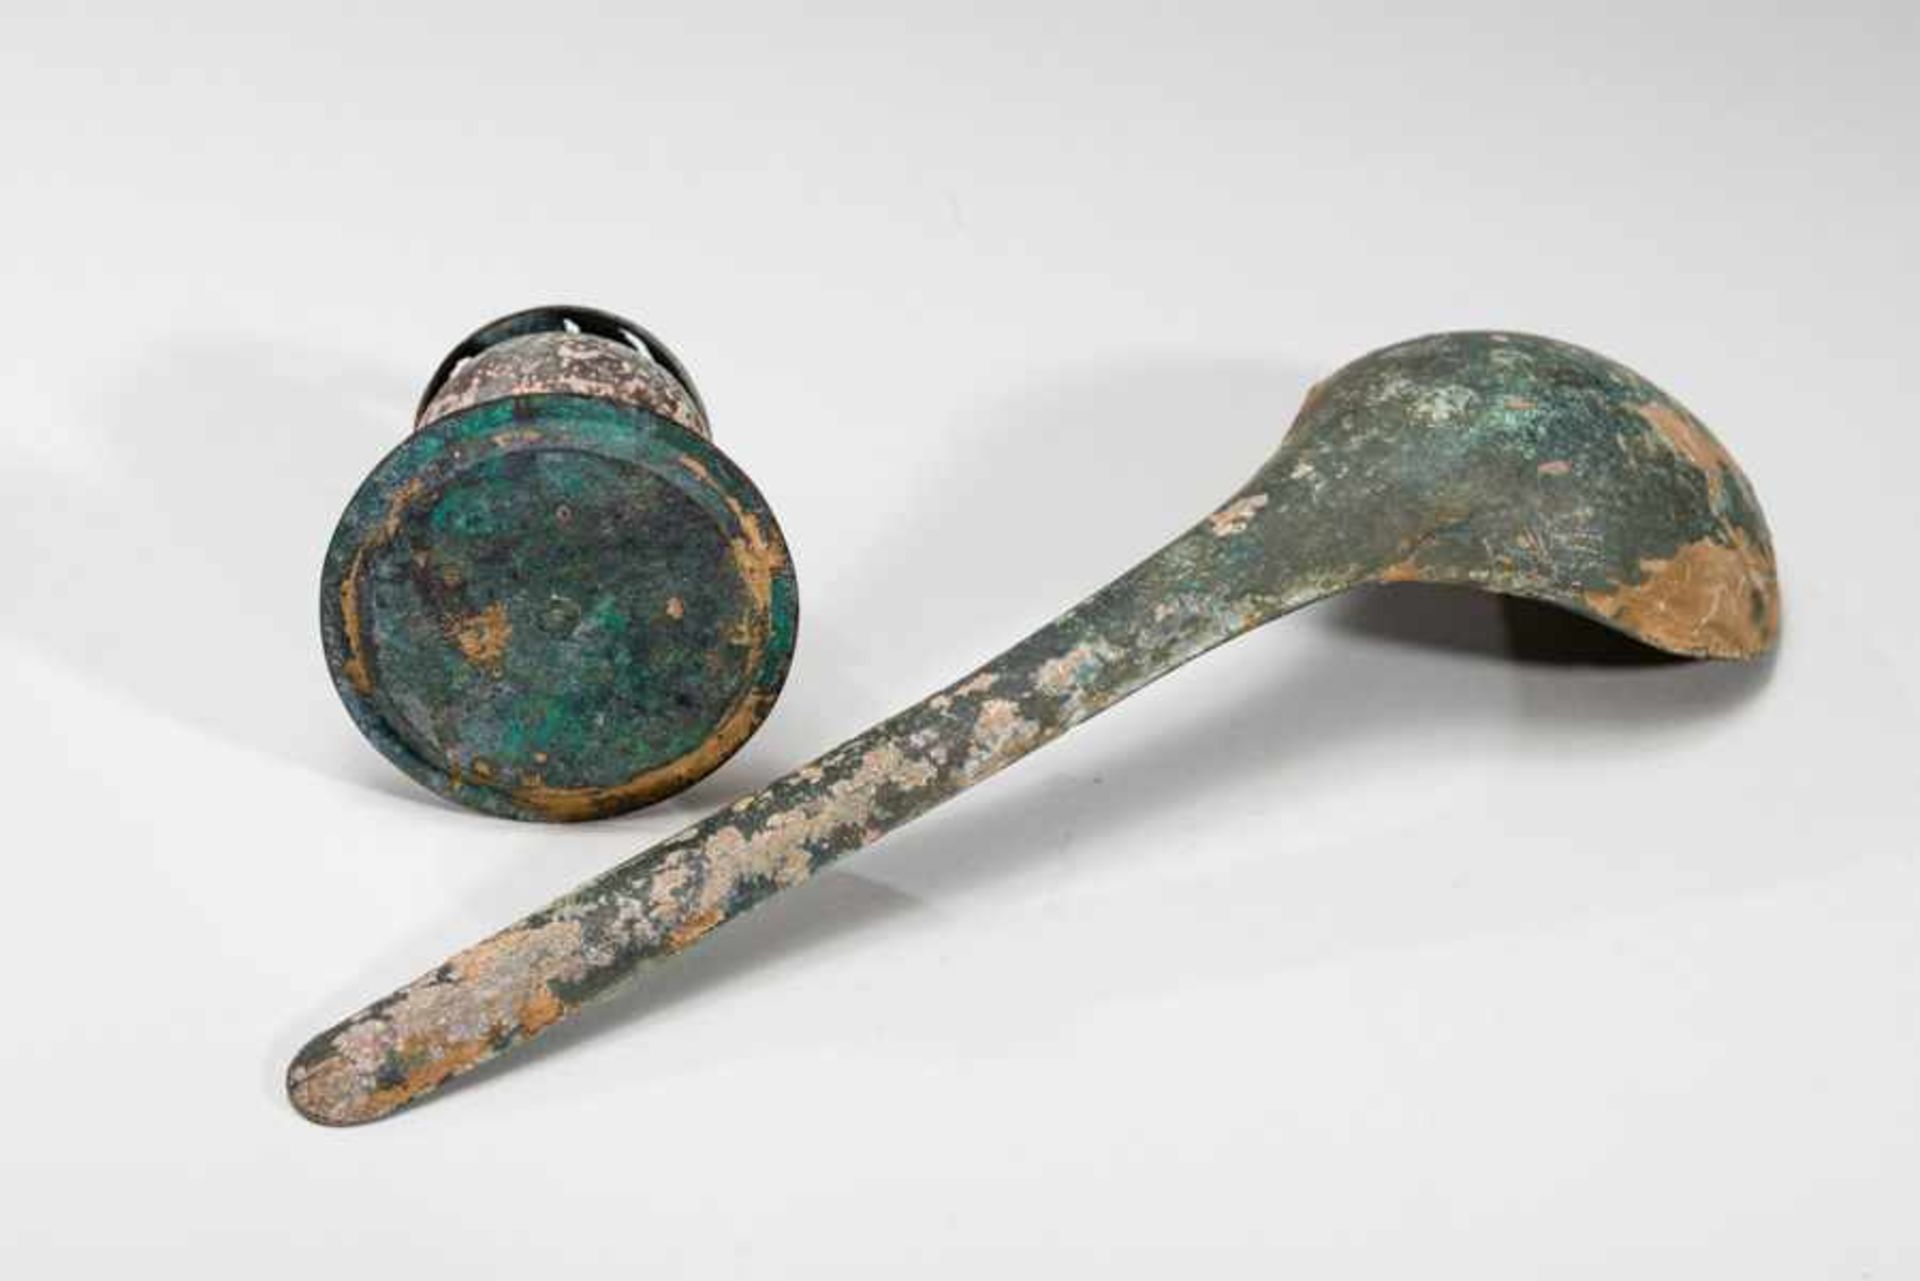 INCENSE BURNER AND SPOON Bronze. China, presumably Han dynasty, 206 BCE - 220 CE香爐與勺The vessel has a - Image 3 of 3